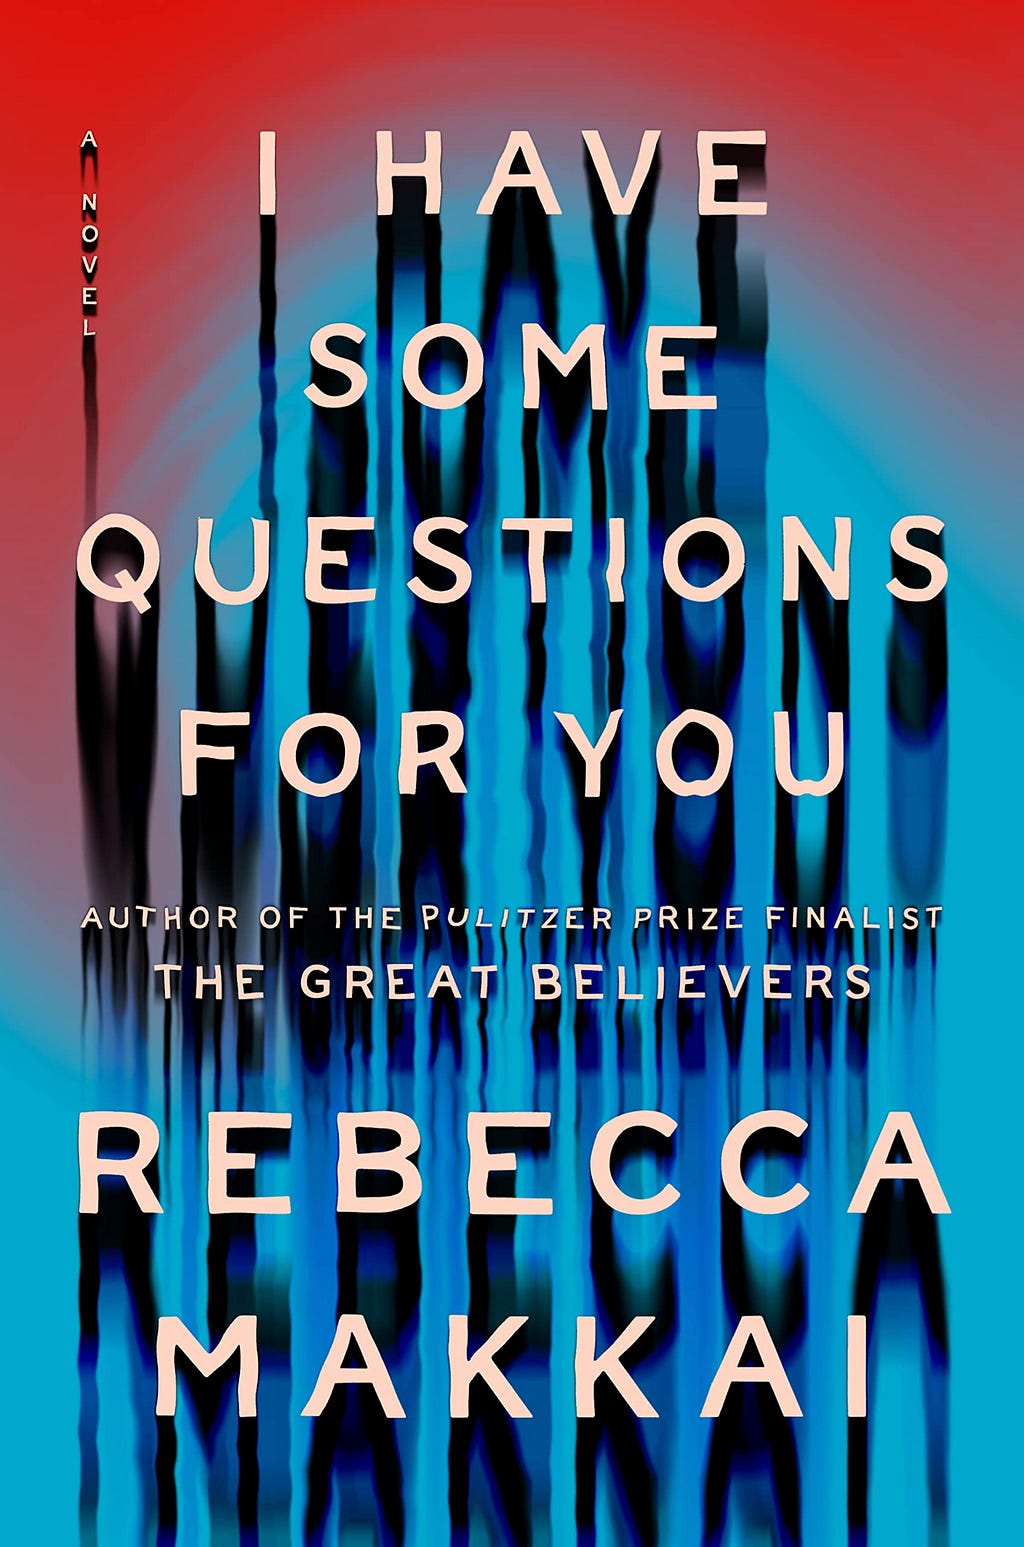 PDF I Have Some Questions for You By Rebecca Makkai